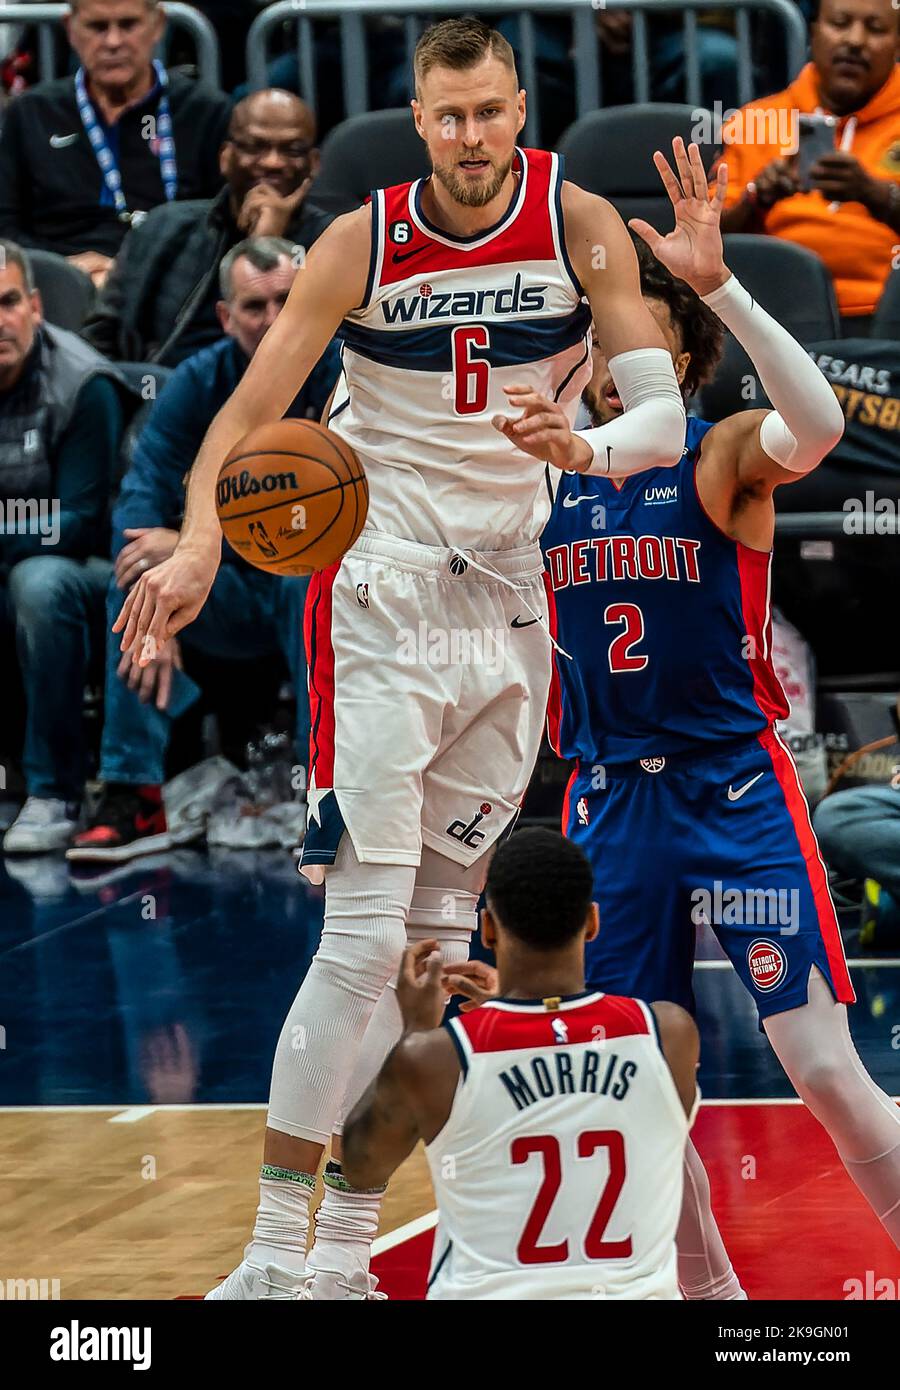 A little action from Washington Wizards basketball game against the Detroit Pistons Stock Photo